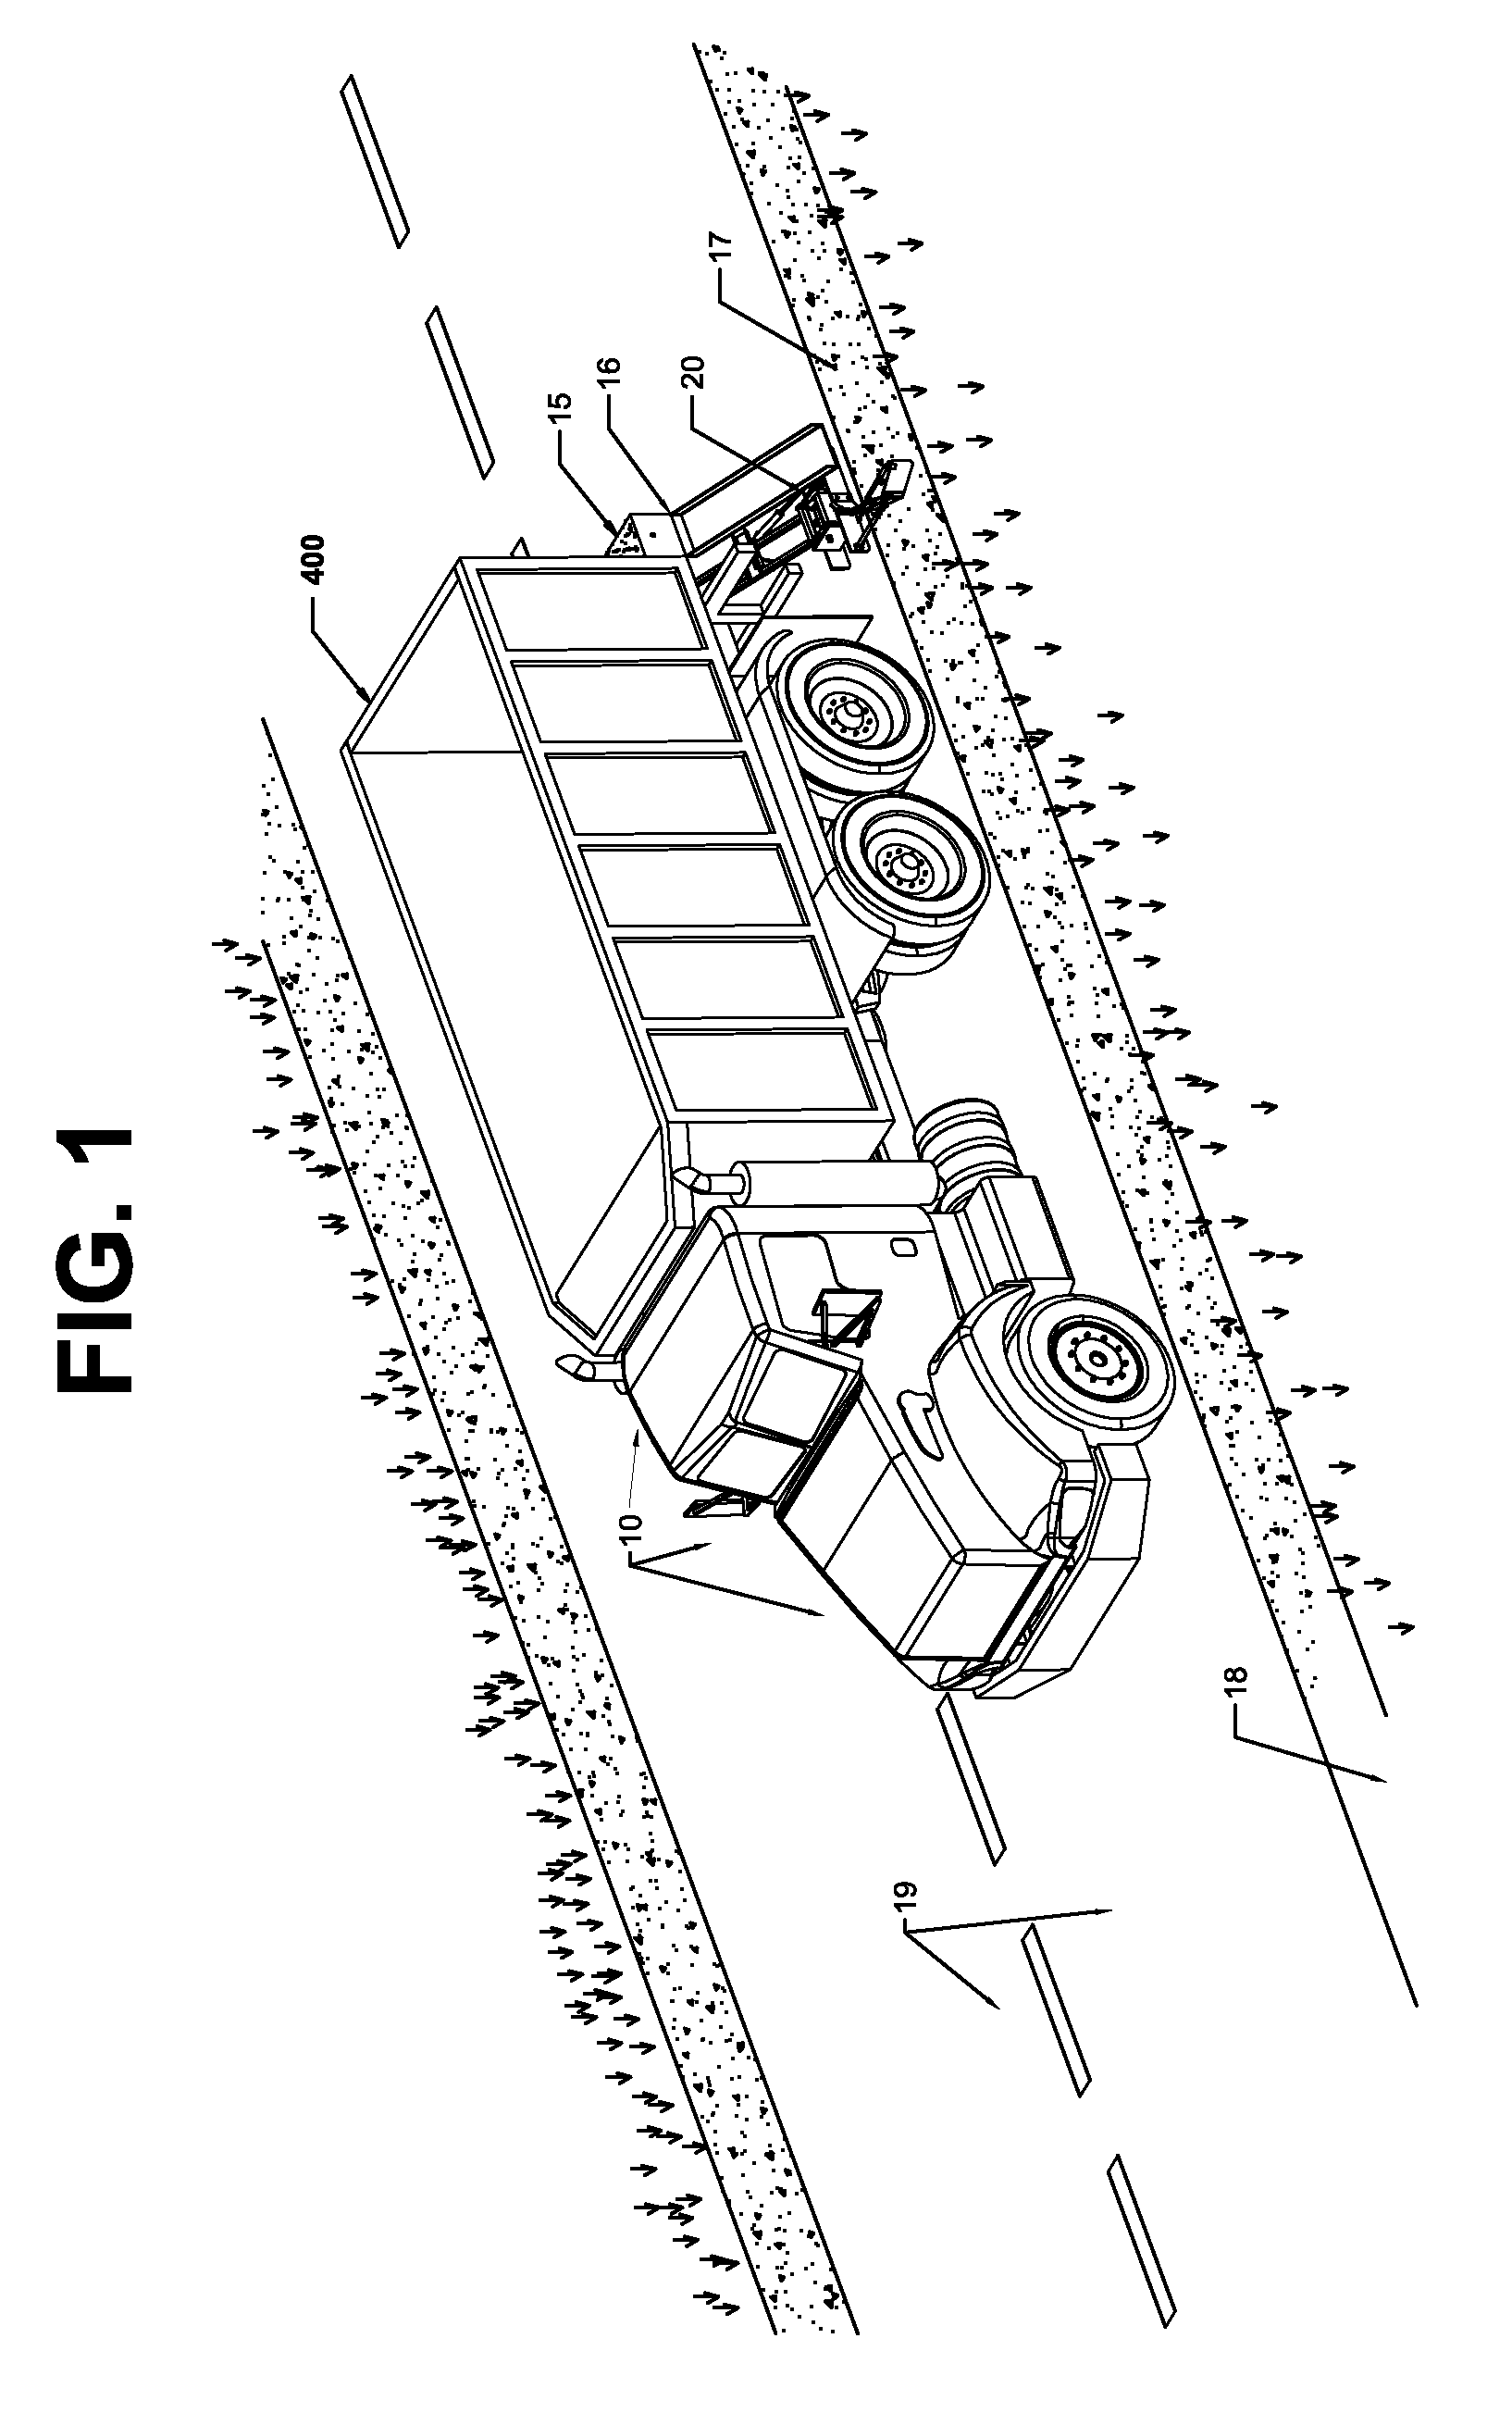 Adjustable method and apparatus for laying, leveling and compacting road shoulders